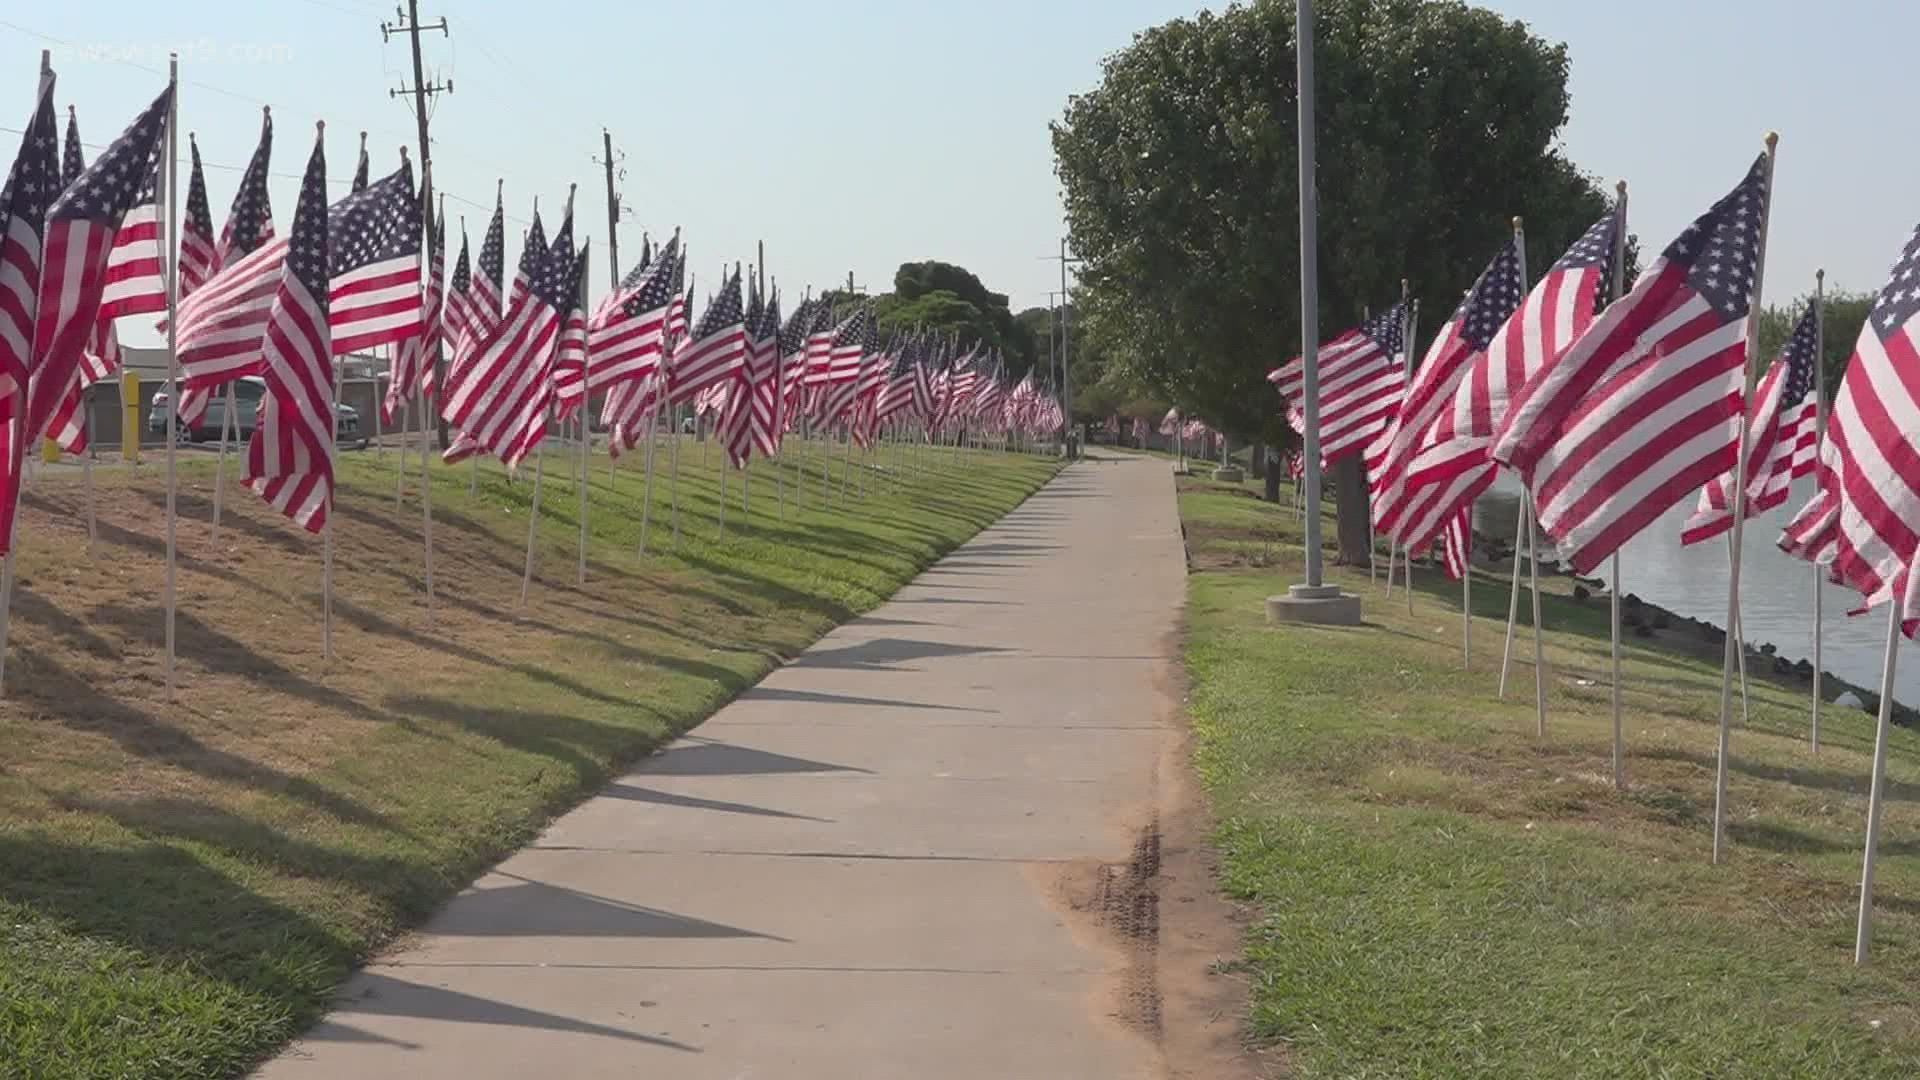 The flag display will stay up until Sept. 21.